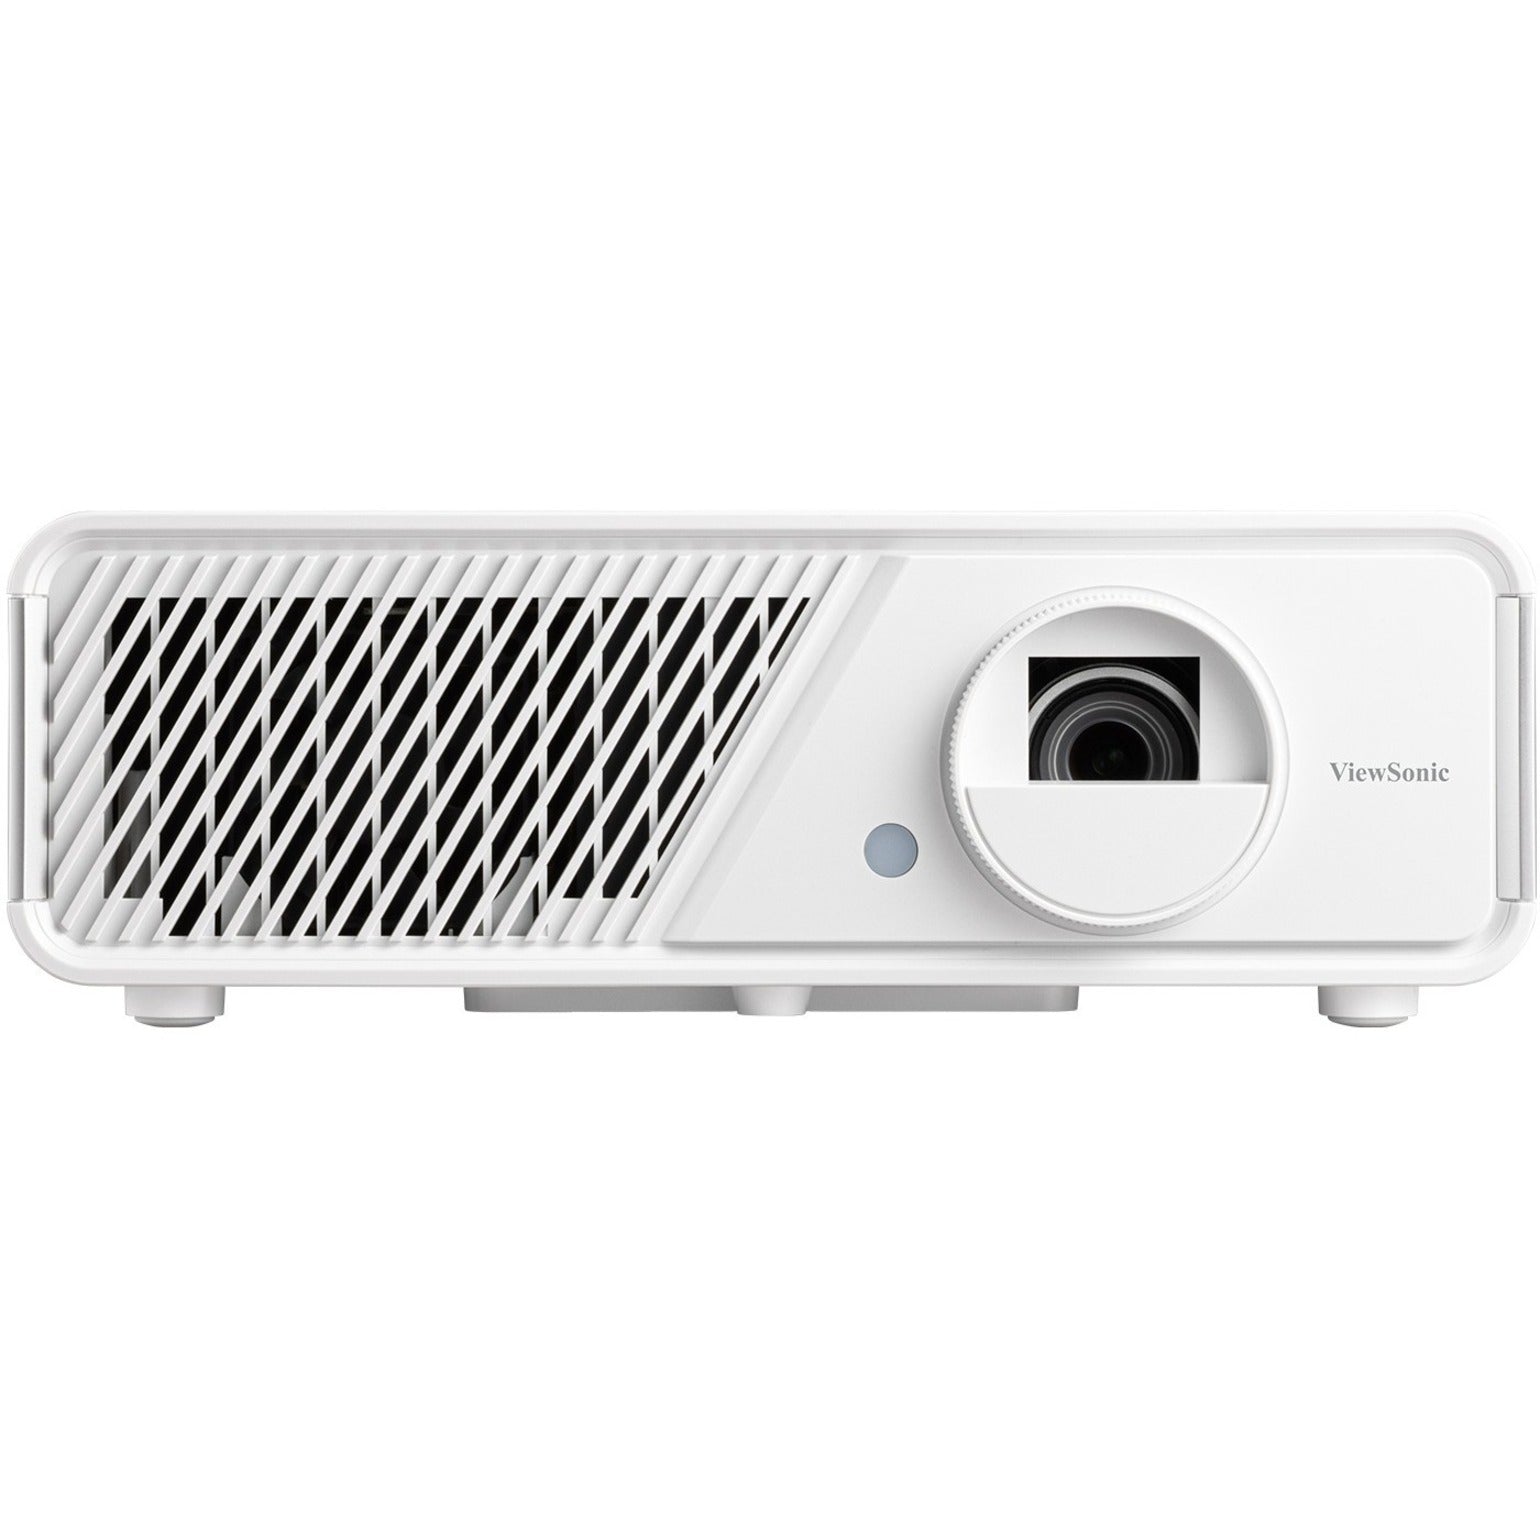 ViewSonic X1 1080p Projector with 3100 LED Lumens, USB-C, BT Speakers and Wi-Fi